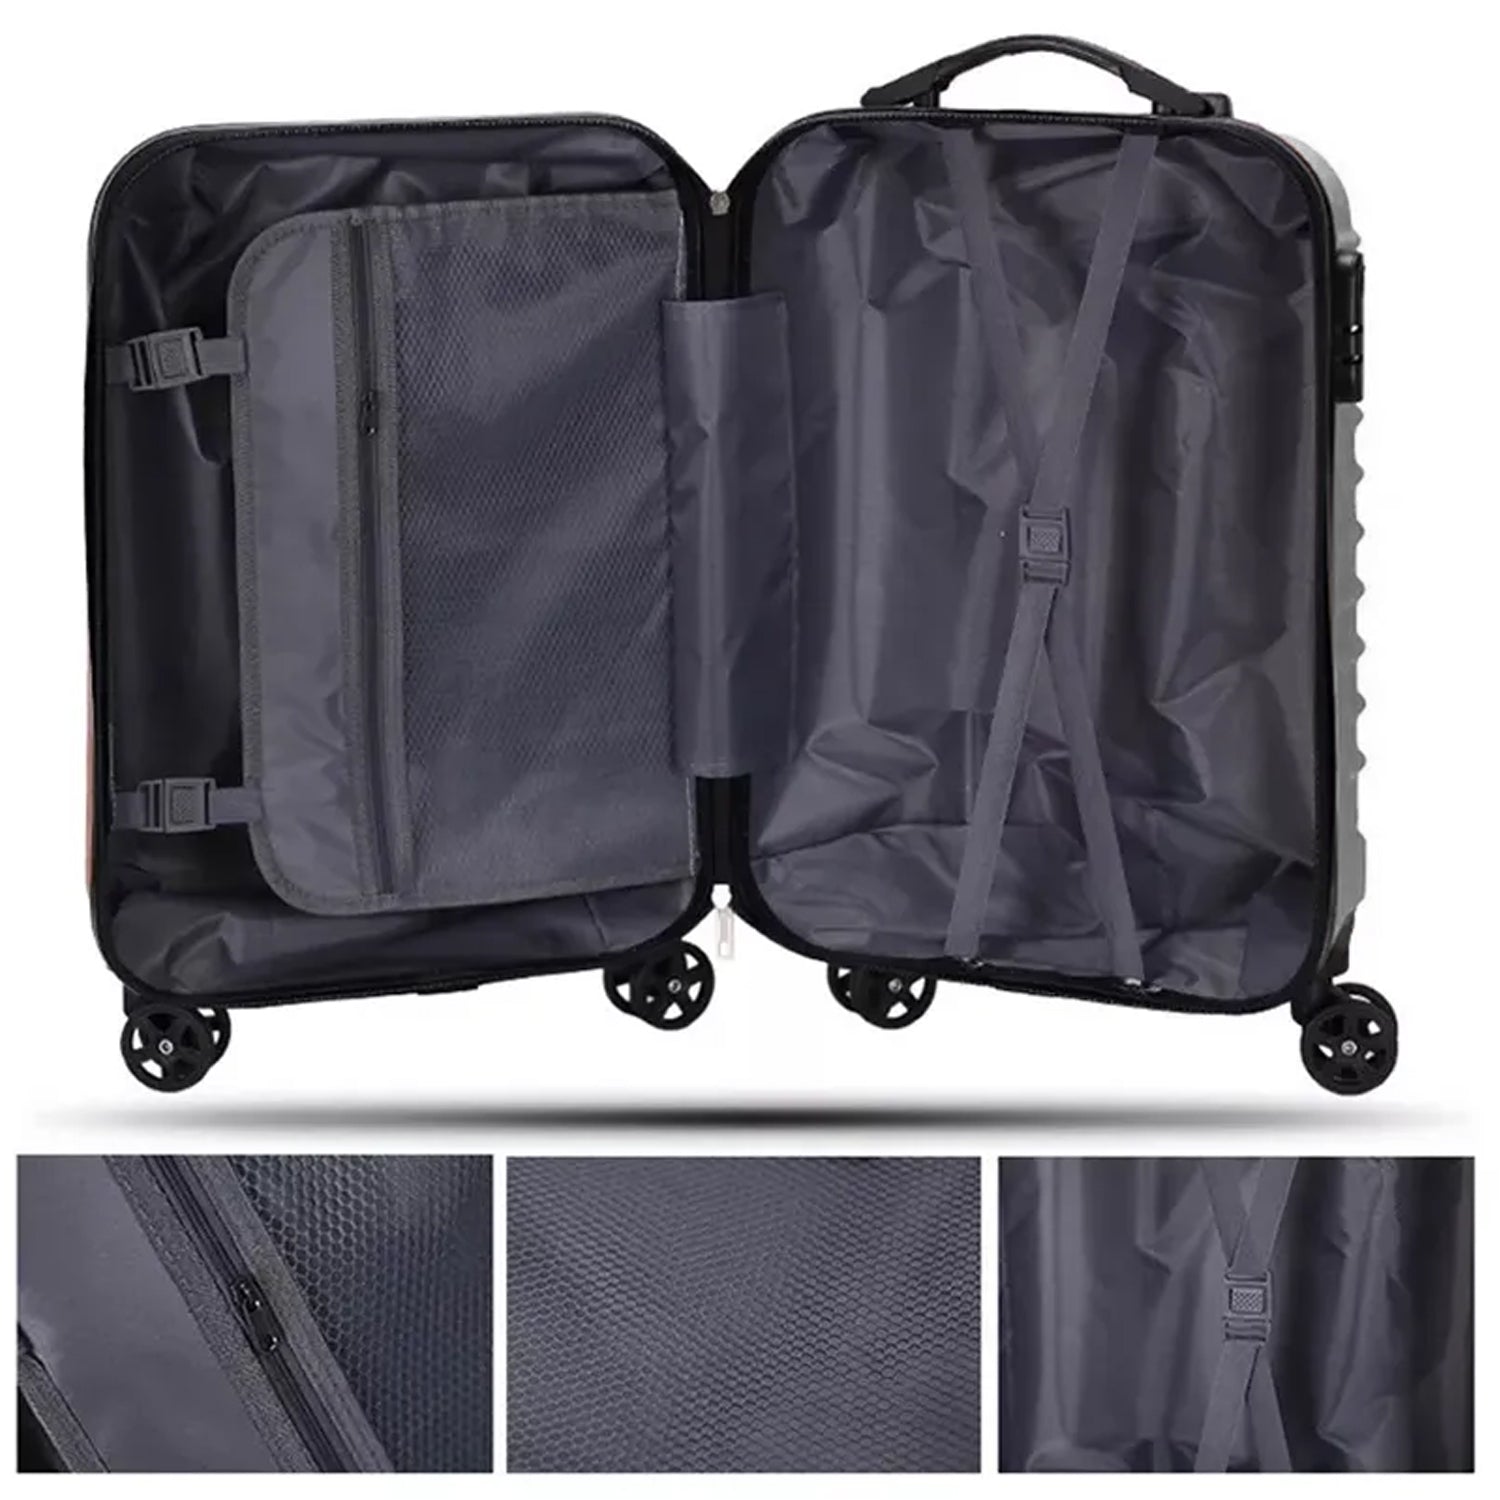 1105 Trolley Bag Big and Small Suitcase Bag For Men & Women Use Bag ( Set Of 2 ) DeoDap